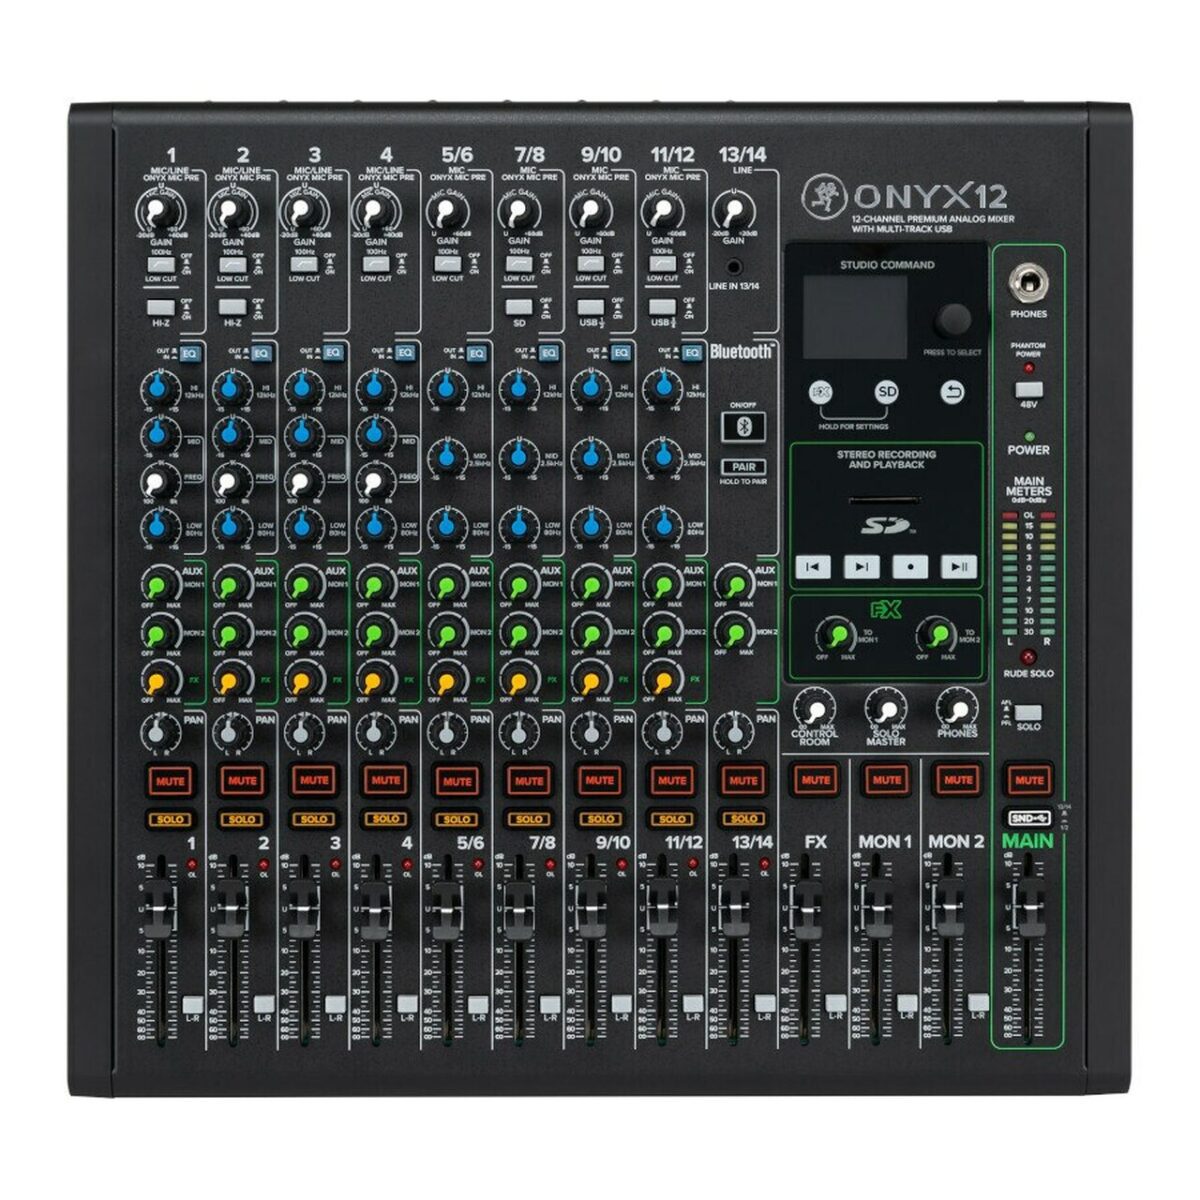 When it comes to world-class quality and versatility, the Mackie Onyx12 12-channel Analog Mixer with Multi-track USB is the perfect go-to board for all your live sound and recording needs.